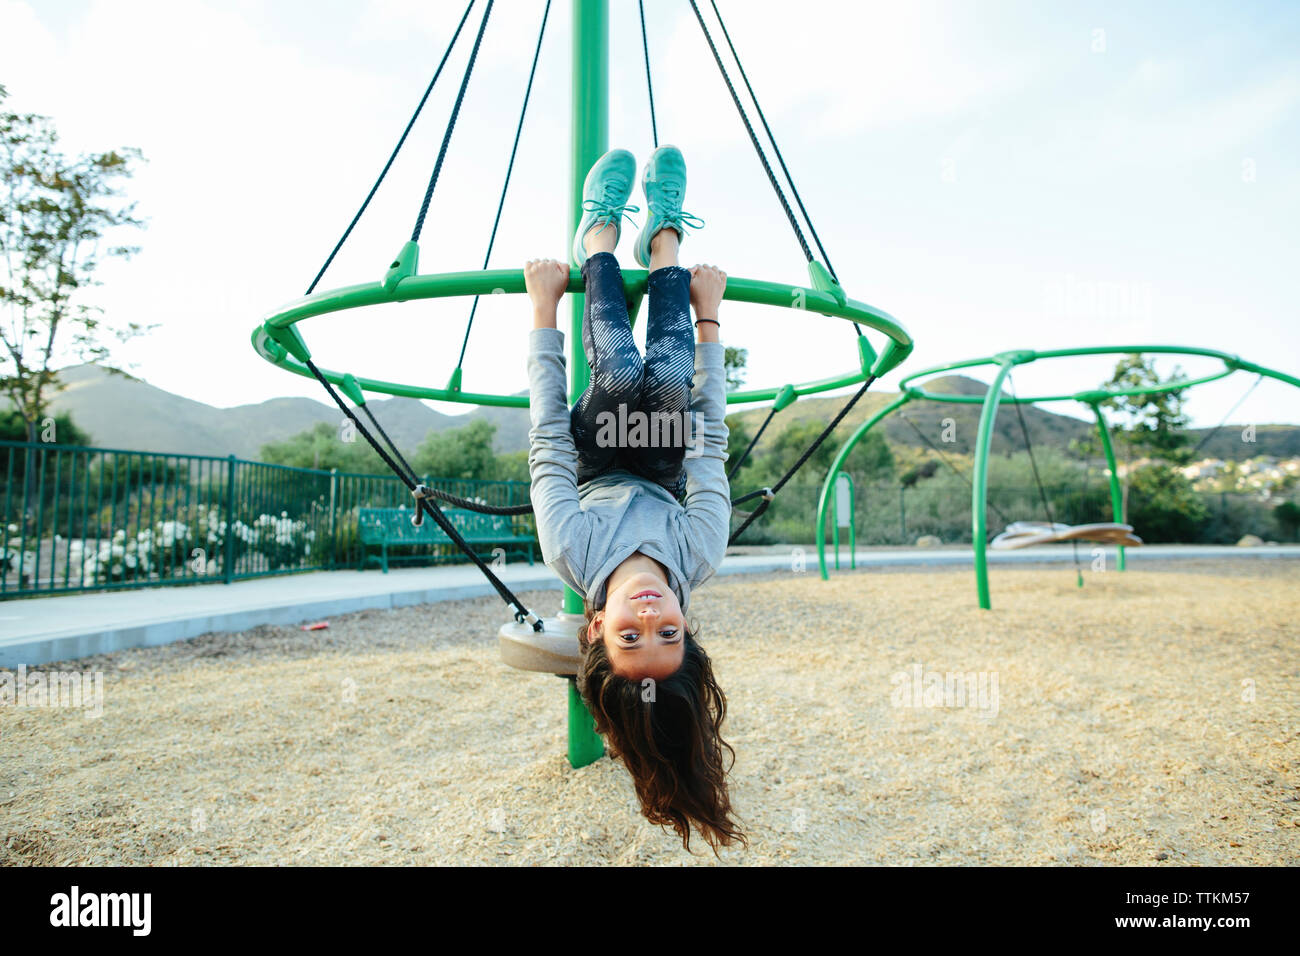 Portrait of girl hanging upside down on outdoor play equipment against sky at playground Stock Photo